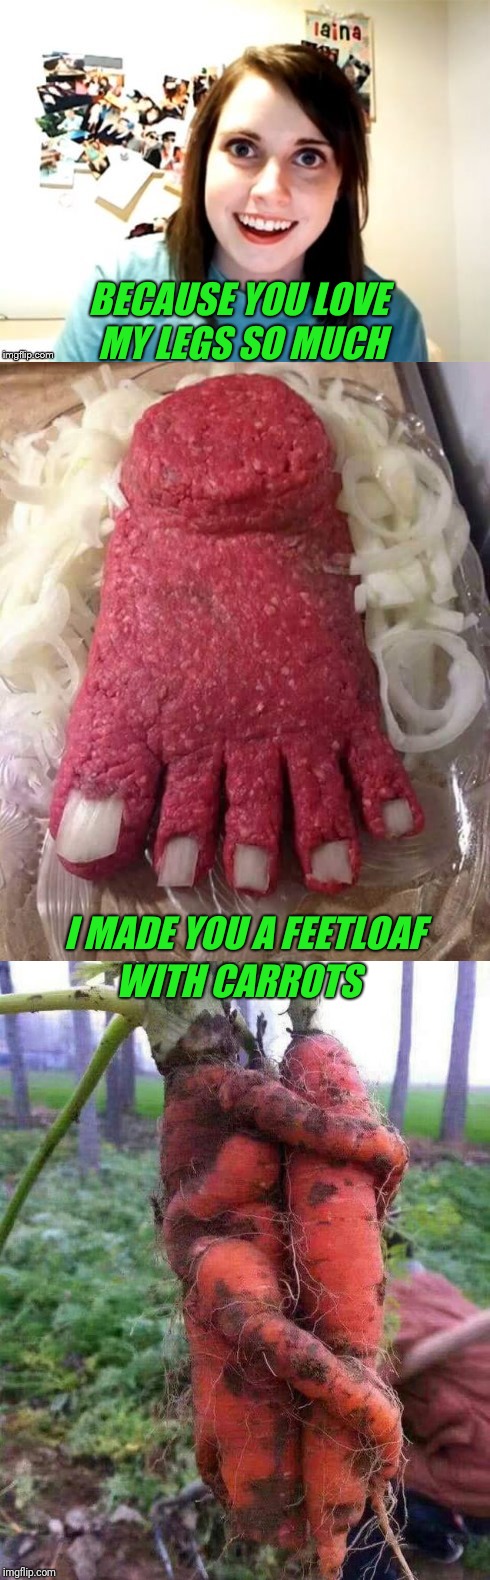 You are what you eat. | BECAUSE YOU LOVE MY LEGS SO MUCH; WITH CARROTS; I MADE YOU A FEETLOAF | image tagged in overly attached girlfriend,food,meatloaf,carrots | made w/ Imgflip meme maker